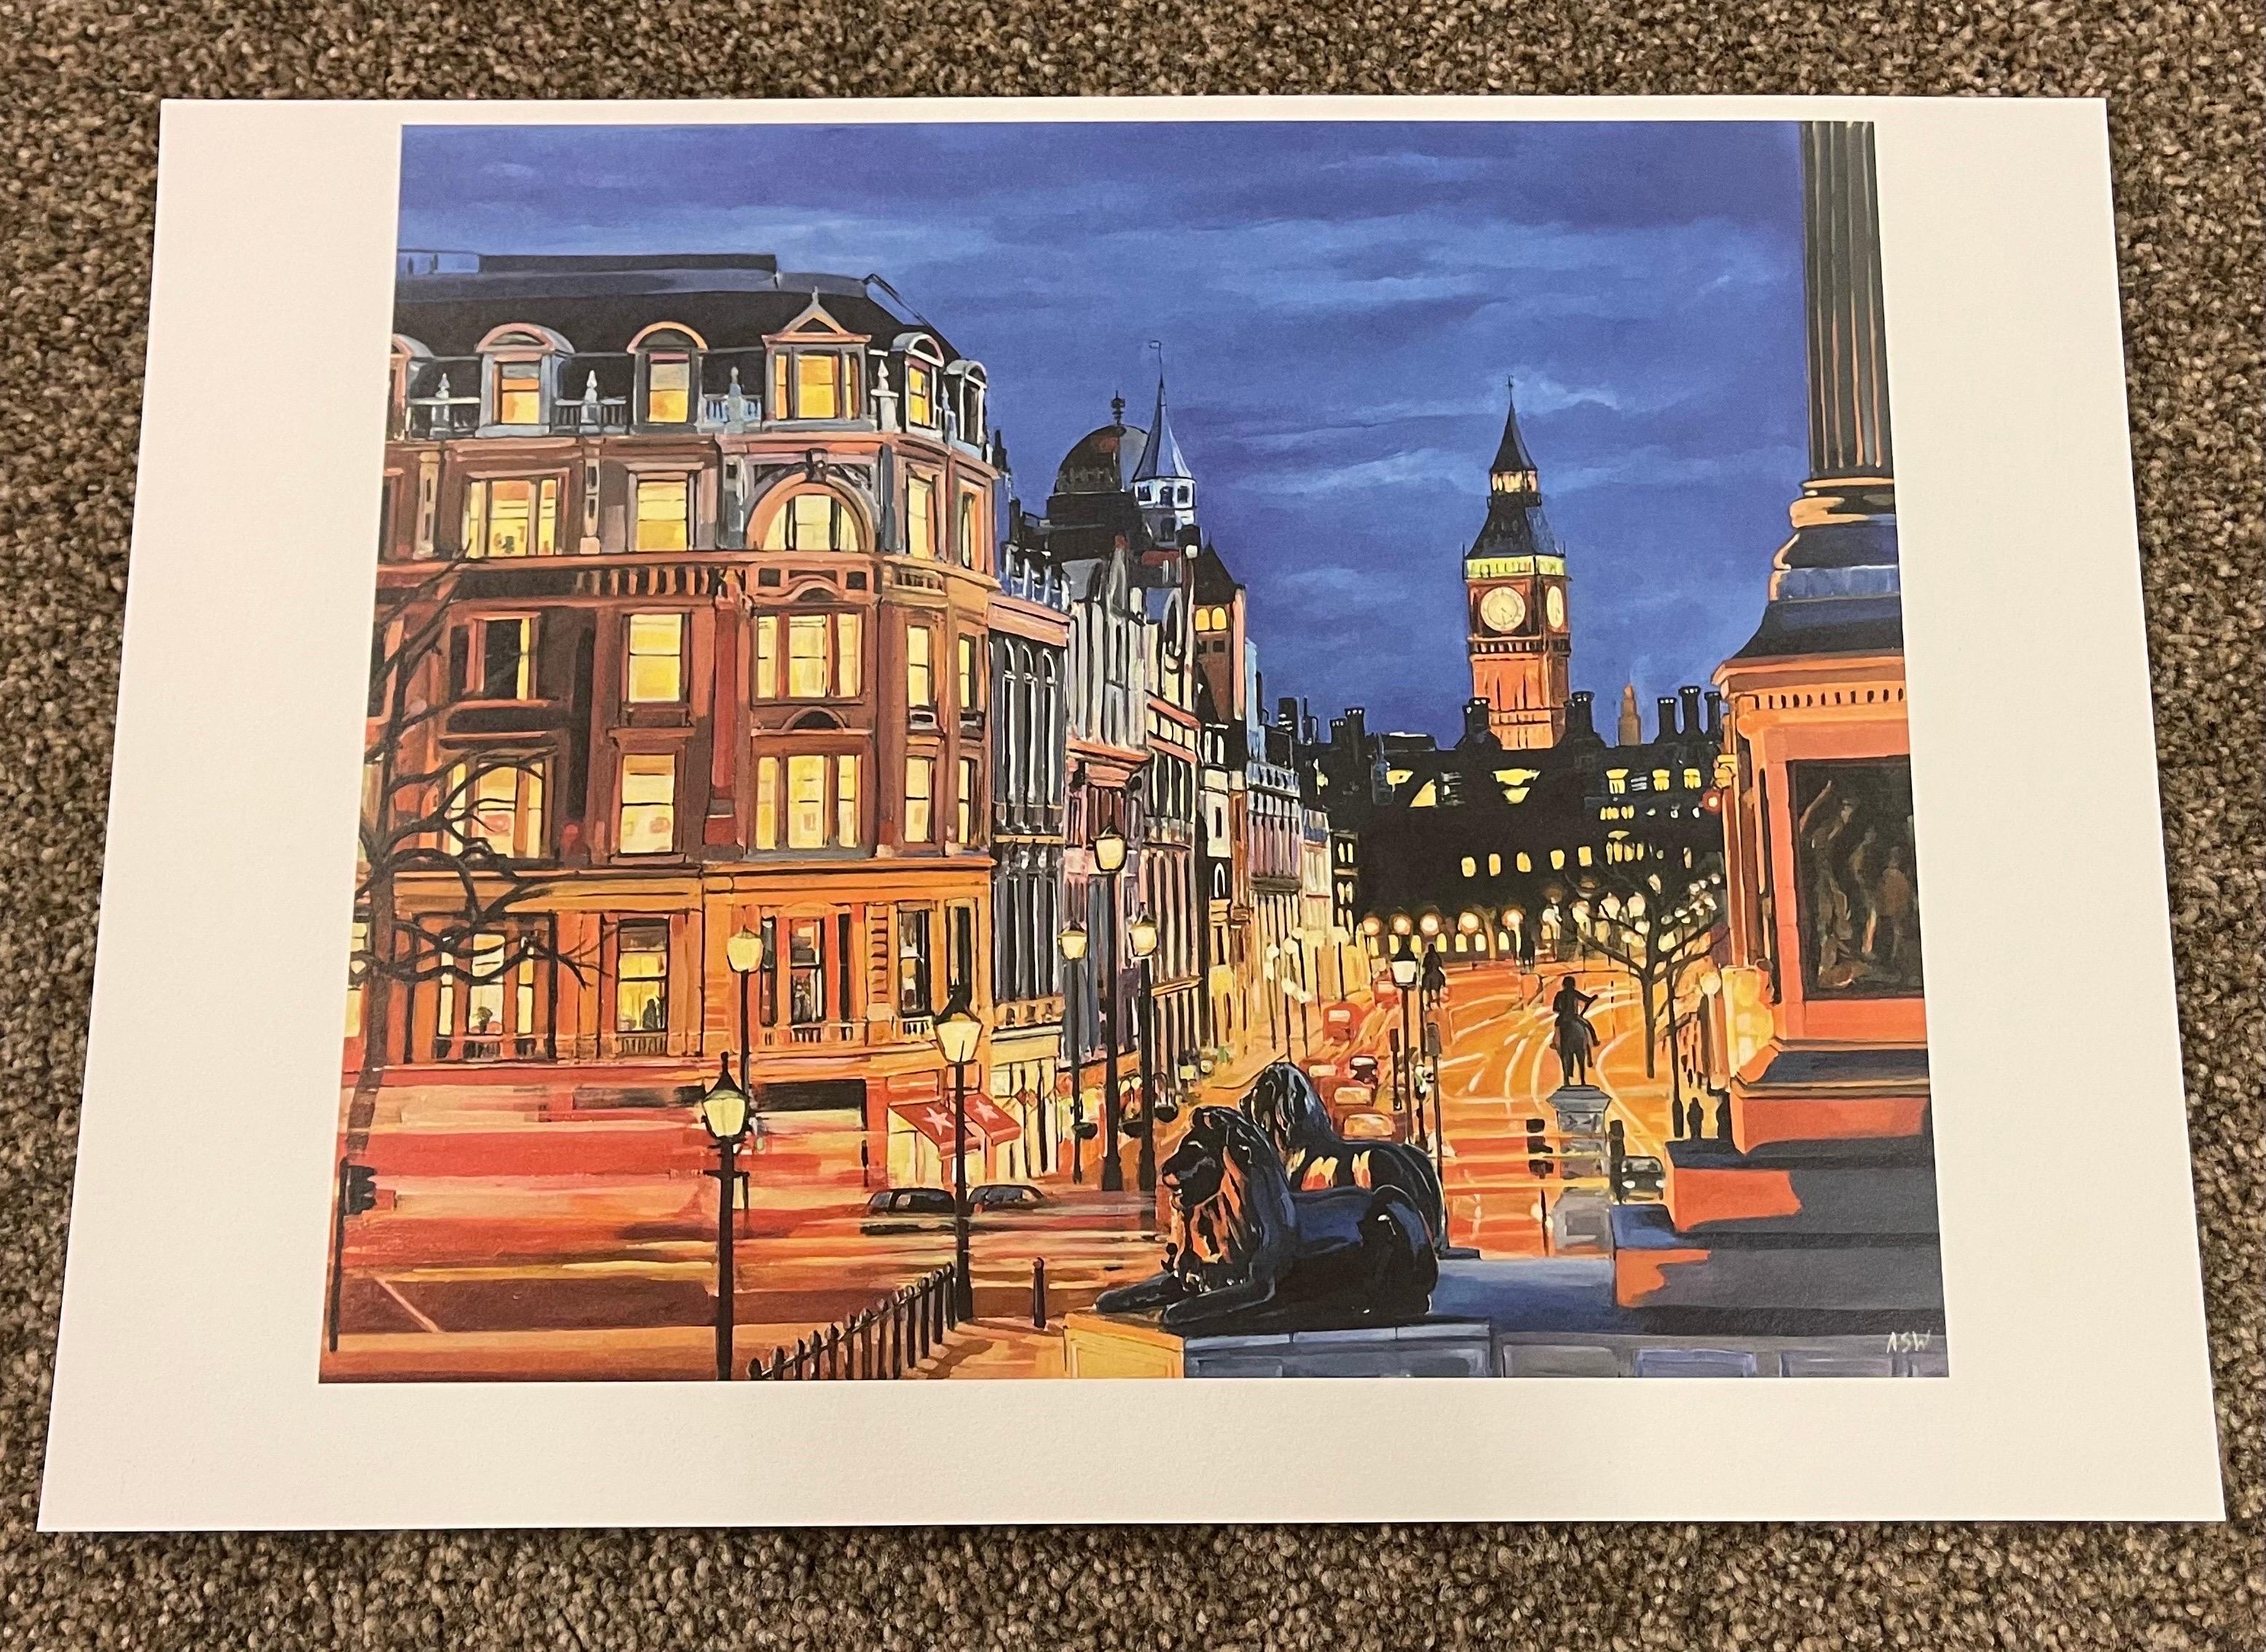 Limited Edition Print of Westminster from Trafalgar Square with Big Ben, London, by leading British urban landscape artist, Angela Wakefield.

Print measures 12.5 x 10.5 inches 
Paper Weight Heavy 250gsm
Paper Type Perlino Cotton 
Paper Size